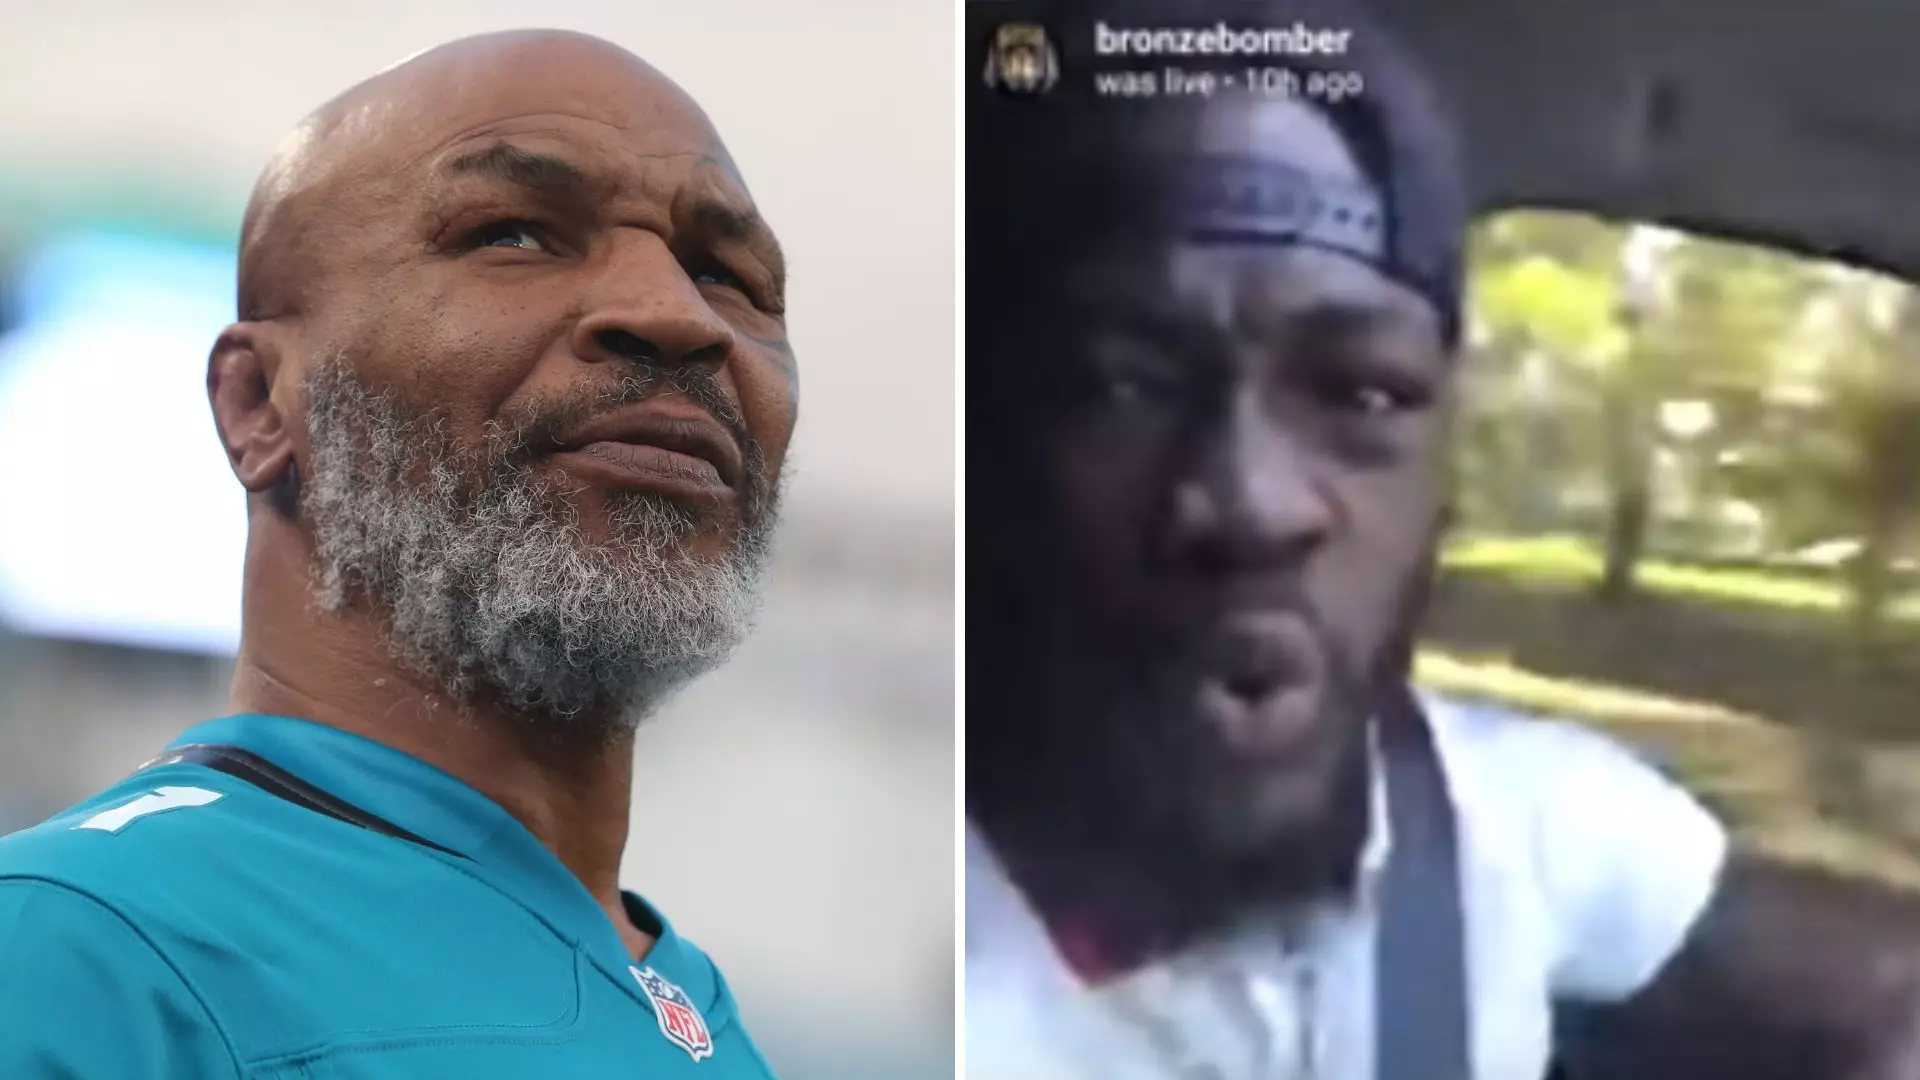 Deontay Wilder Called Out Mike Tyson's Boxing Record In An Astonishing Instagram Live Rant